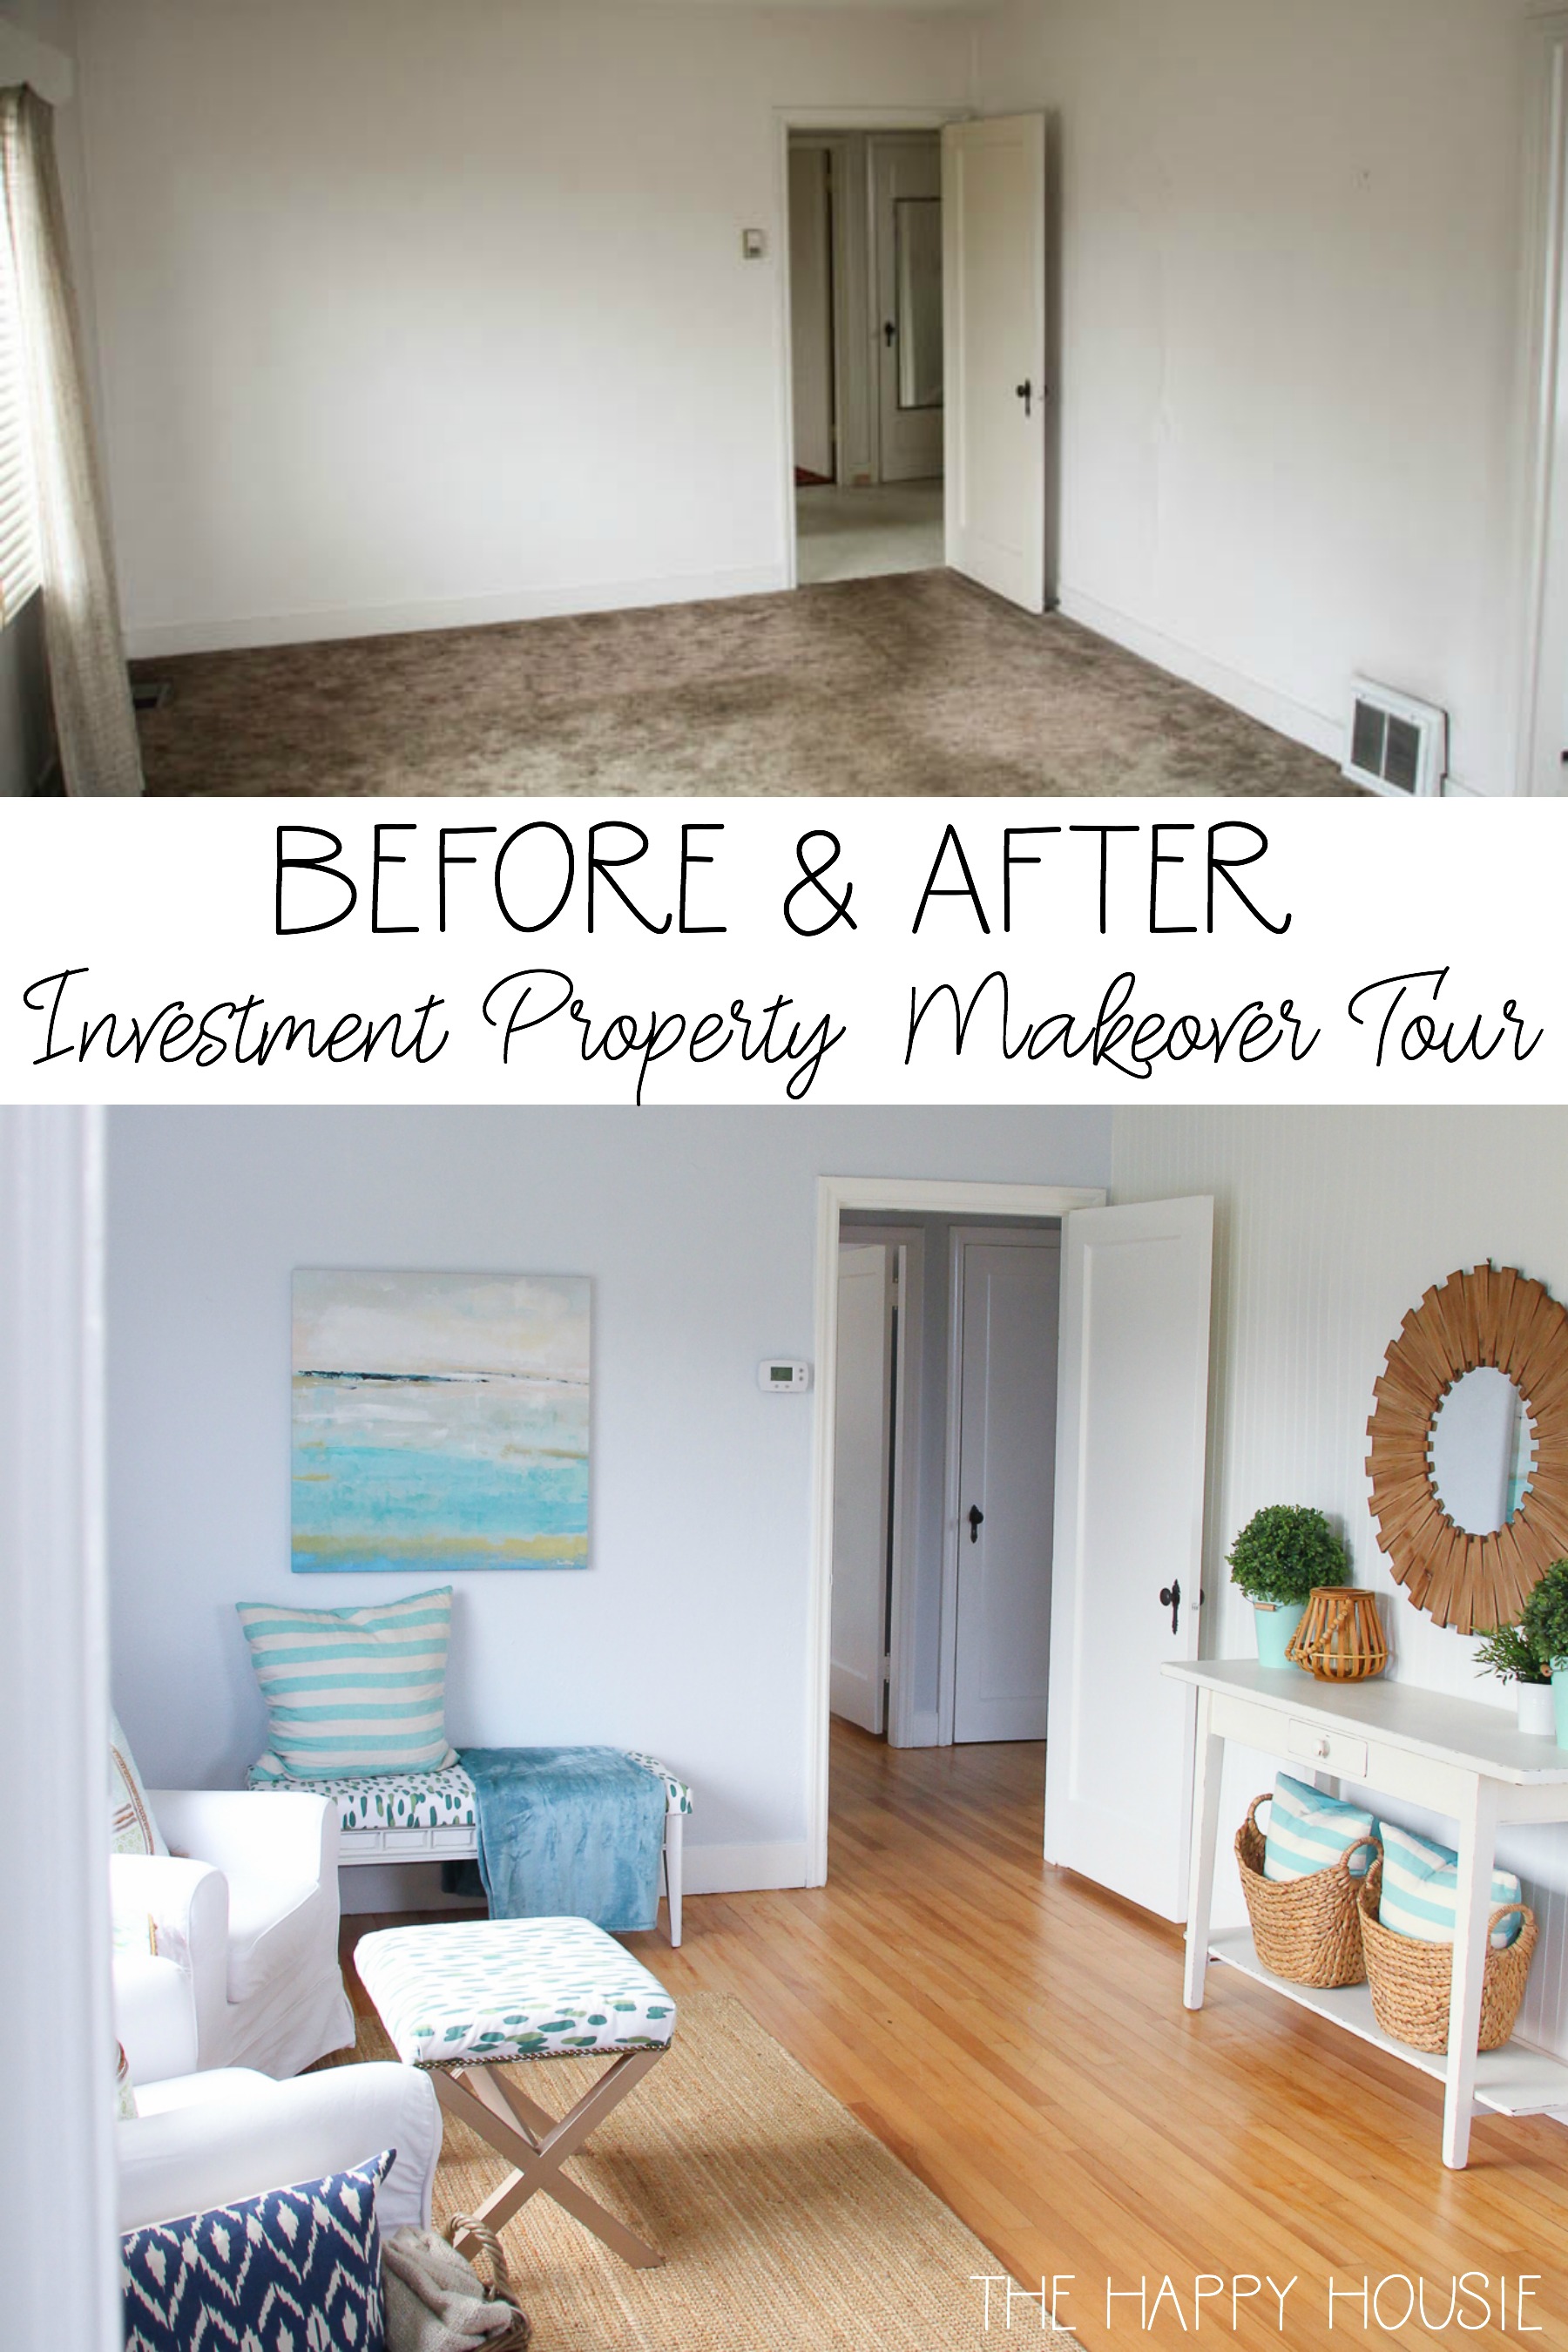 Before & After Investment Property Makeover Tour poster.